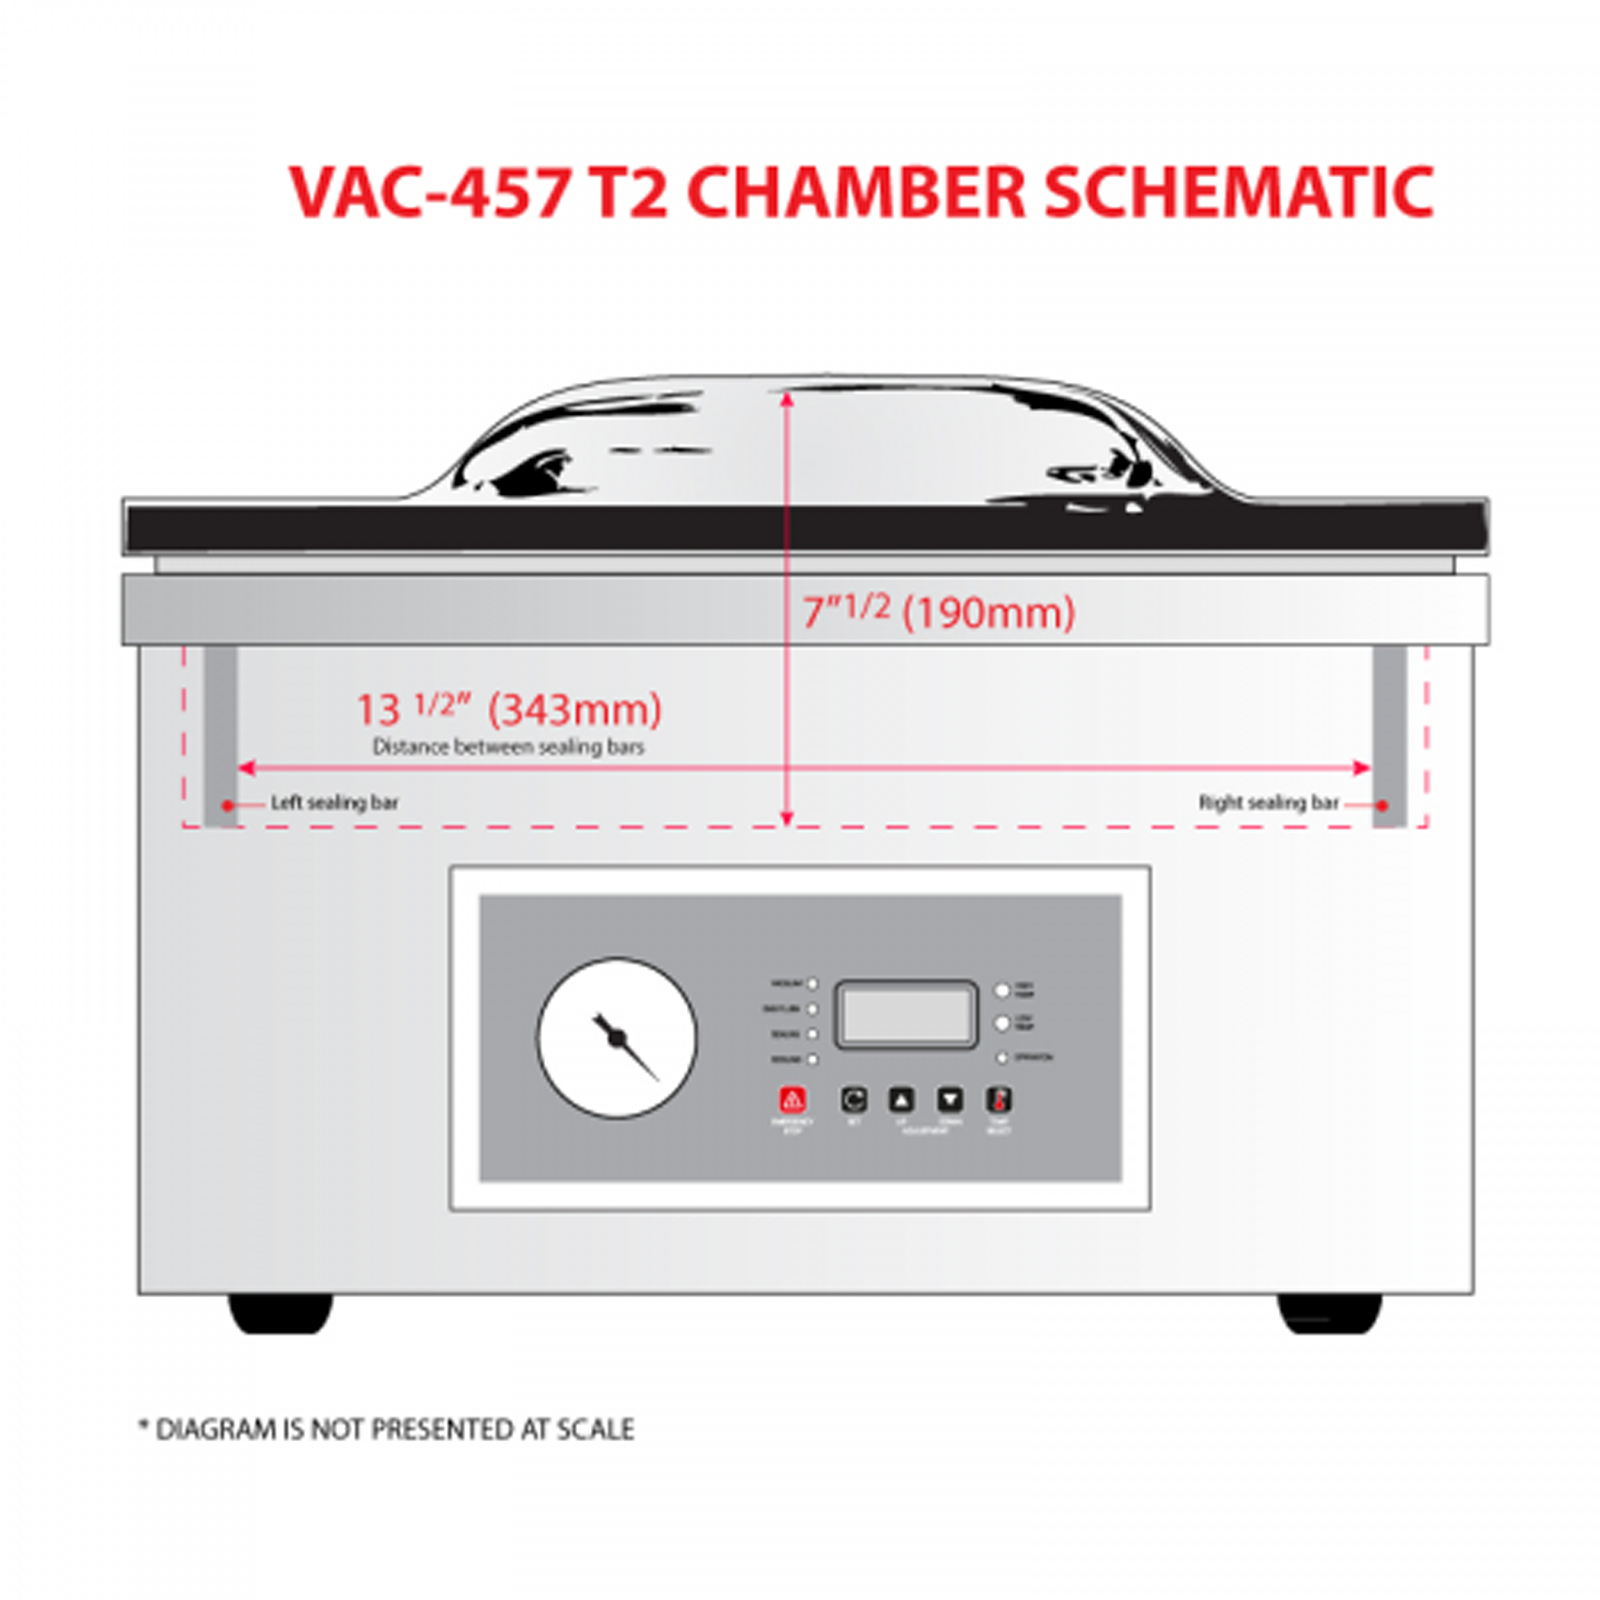 A diagram not presented in scale show a front view with the measurements of the JORESTCH vacuum chamber. Text reads: VAC-457-T2 Chamber Schematics. Distance between left seal bar to right seal bar: 13